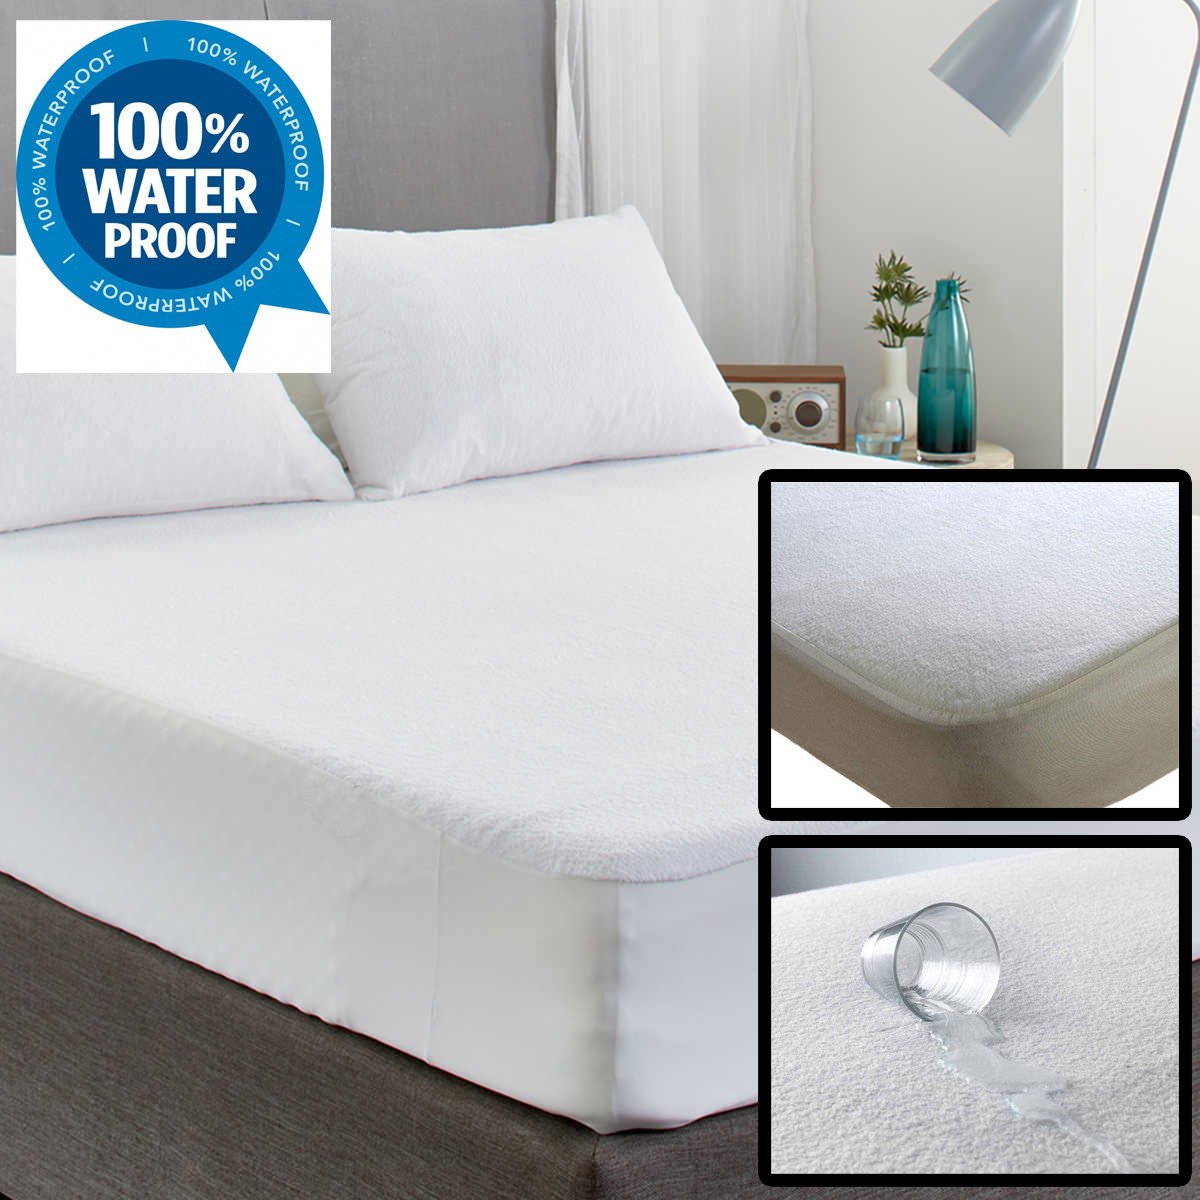 TERRY TOWELING MATTRESS PROTECTOR - TheComfortshop.co.ukMattress Protectors10721718954832thecomfortshopTheComfortshop.co.ukTERRY DOUBLEDoubleTERRY TOWELING MATTRESS PROTECTOR - TheComfortshop.co.uk